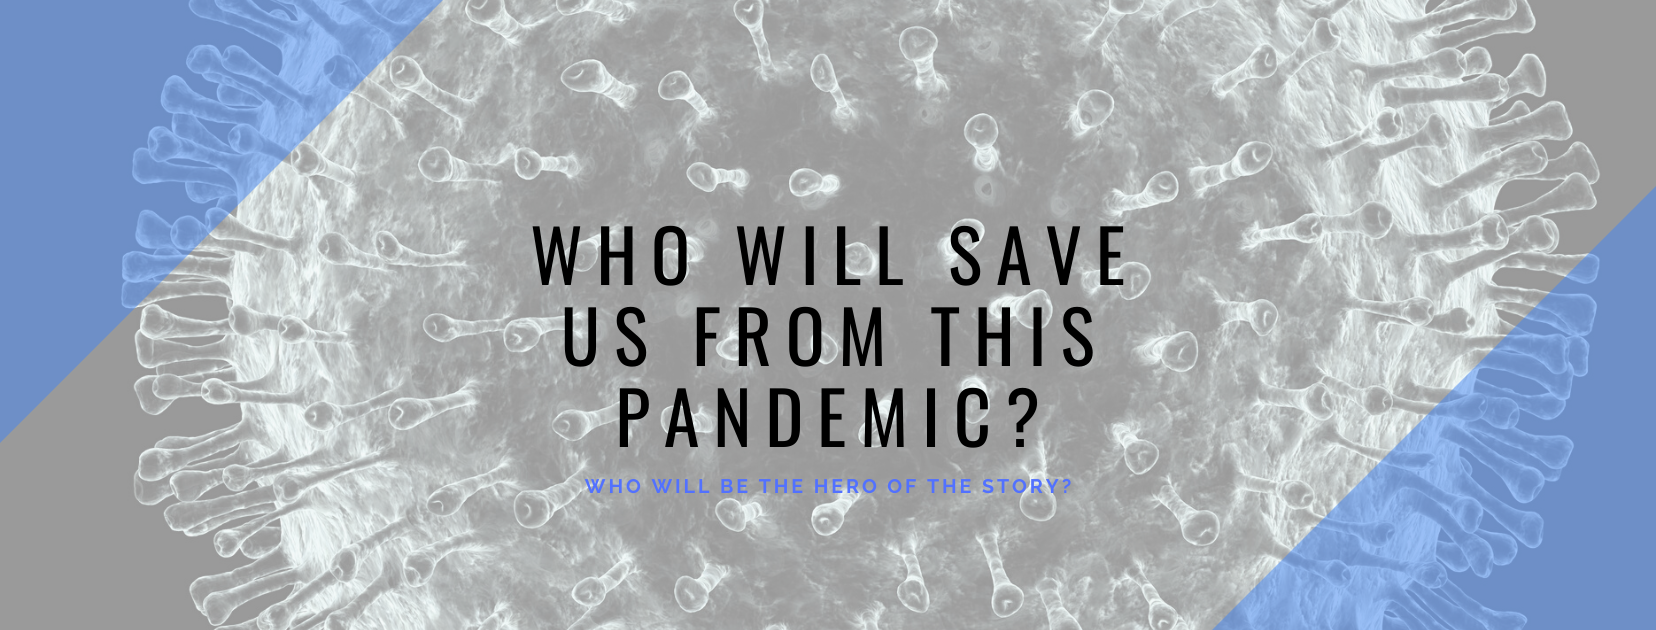 Who Will Save Us From This Pandemic?